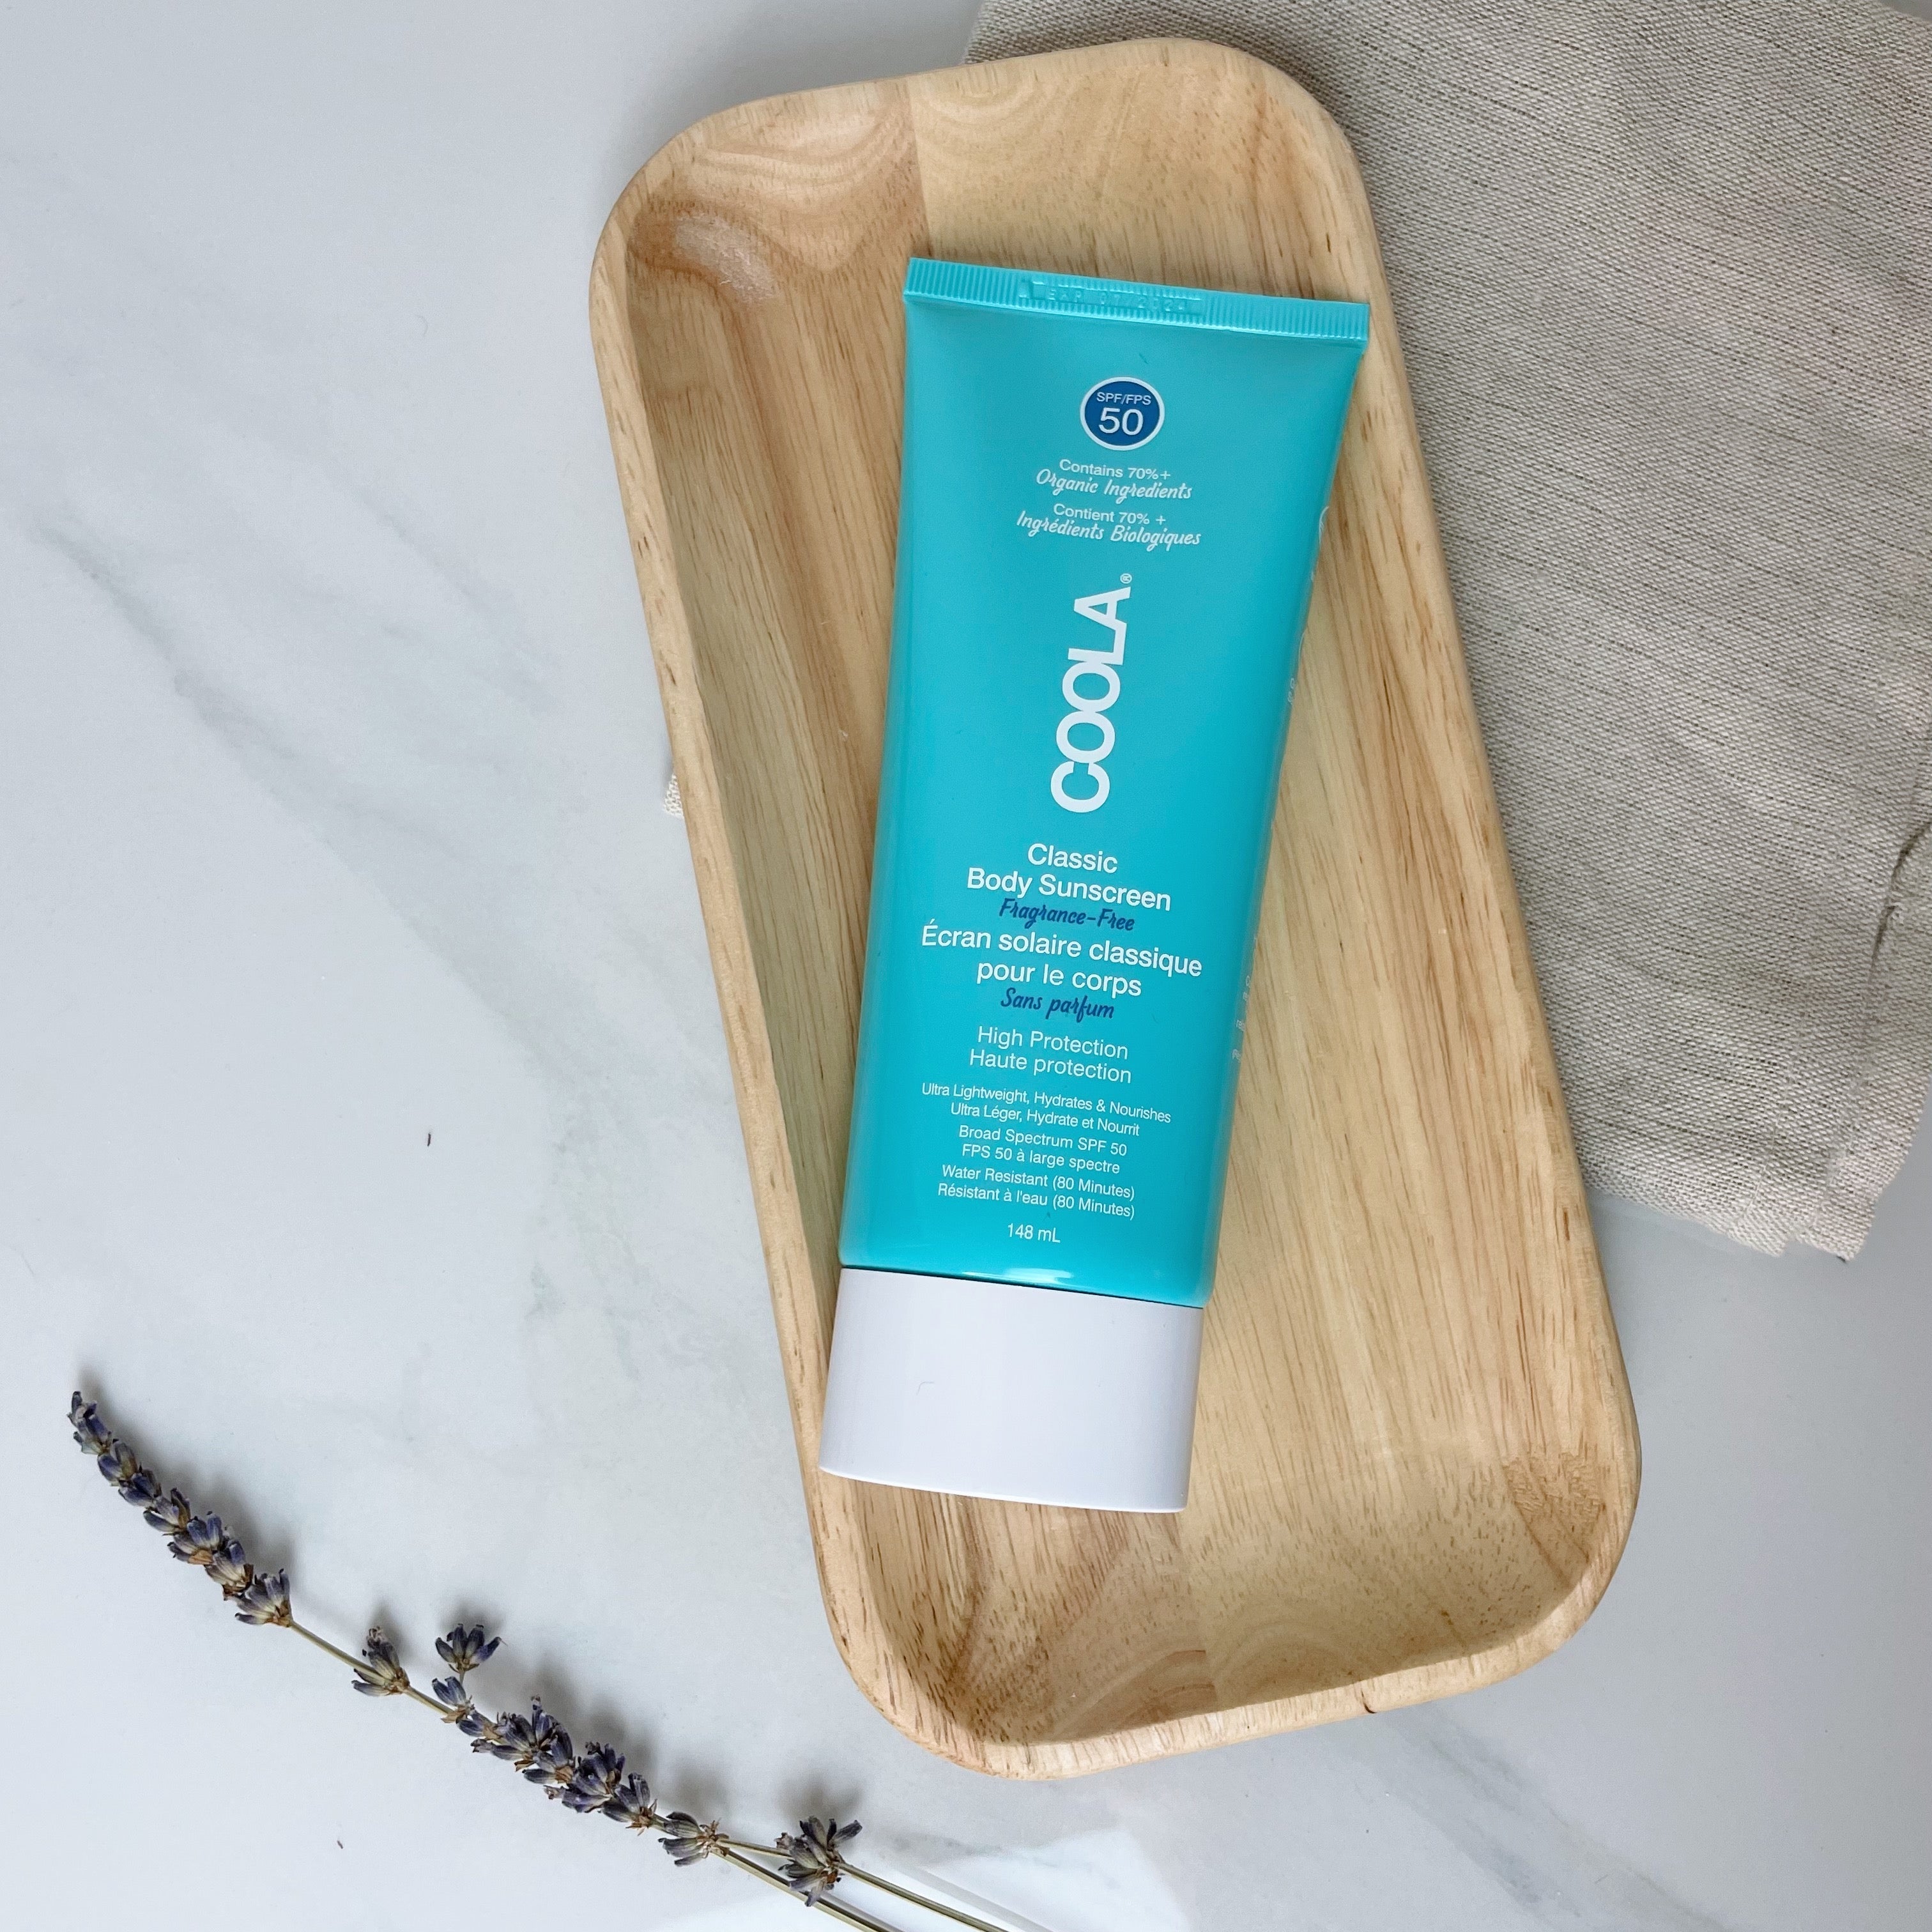 Coola Classic Body Lotion Fragrance-Free SPF 50